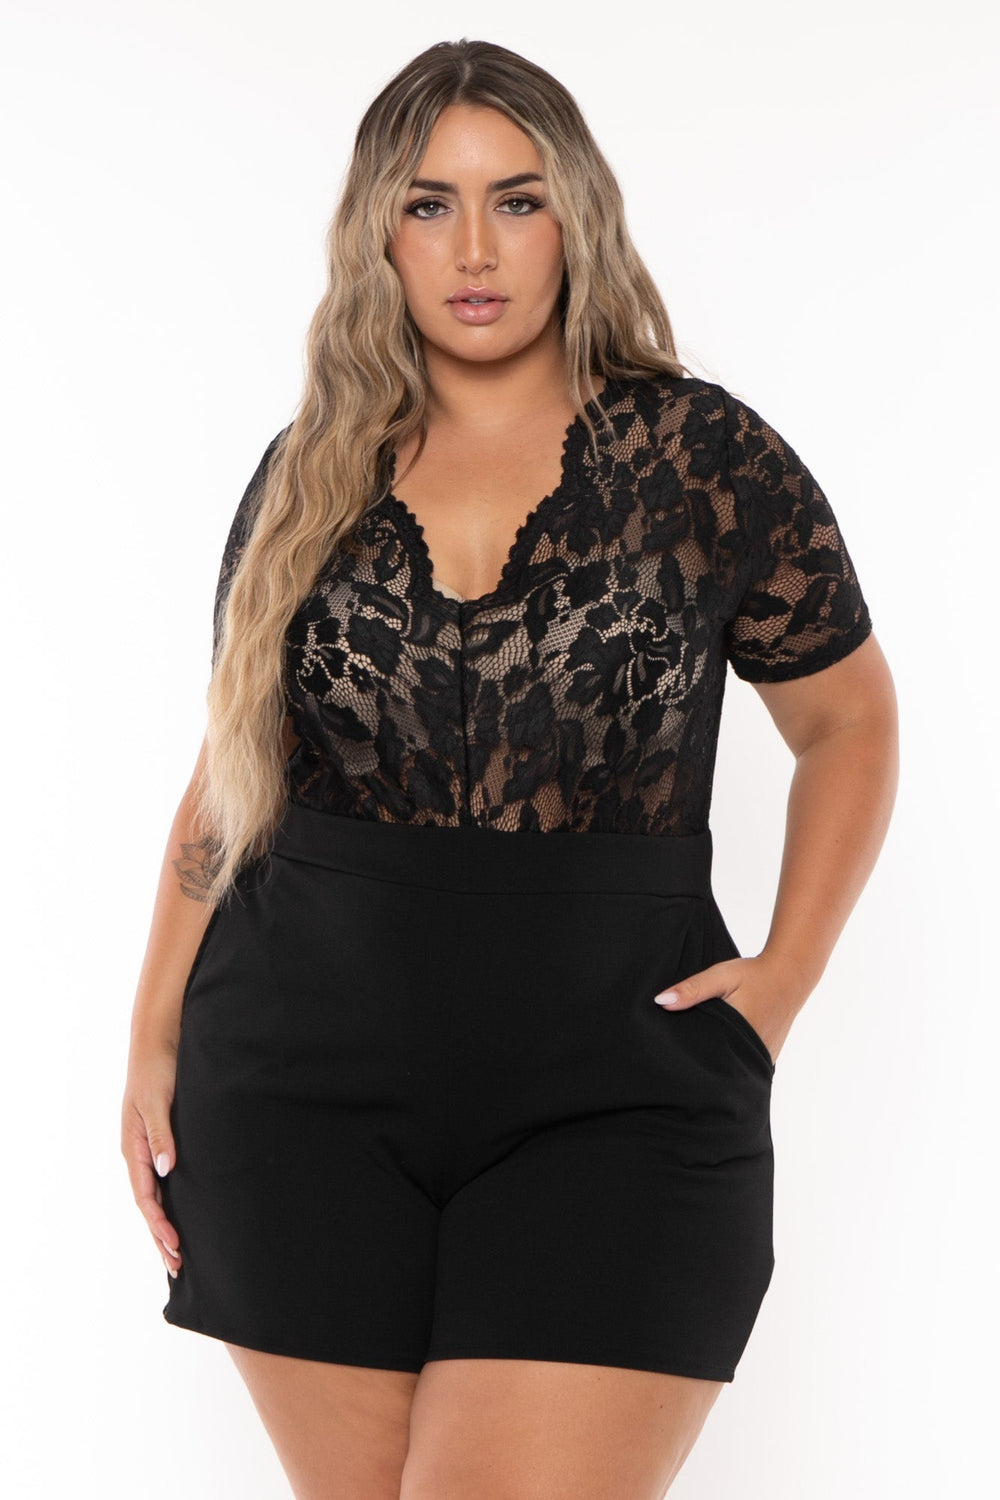 Curvy Sense Jumpsuits and Rompers Plus Size Emaree Lace Top Romper - Black